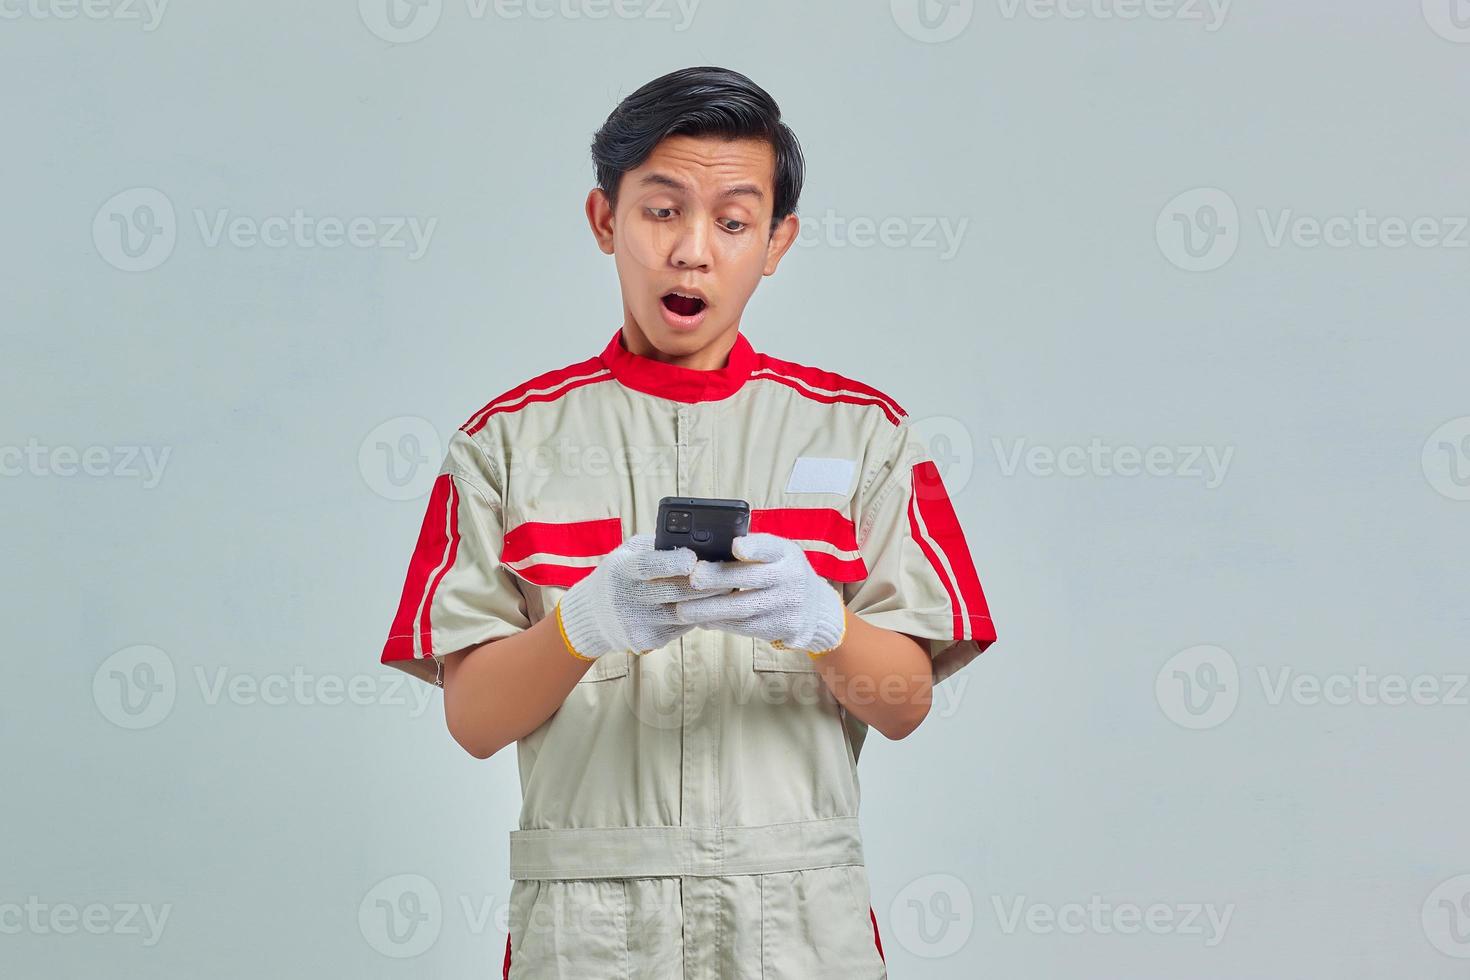 Surprised handsome man wearing mechanical uniform using cell phone isolated on gray background photo